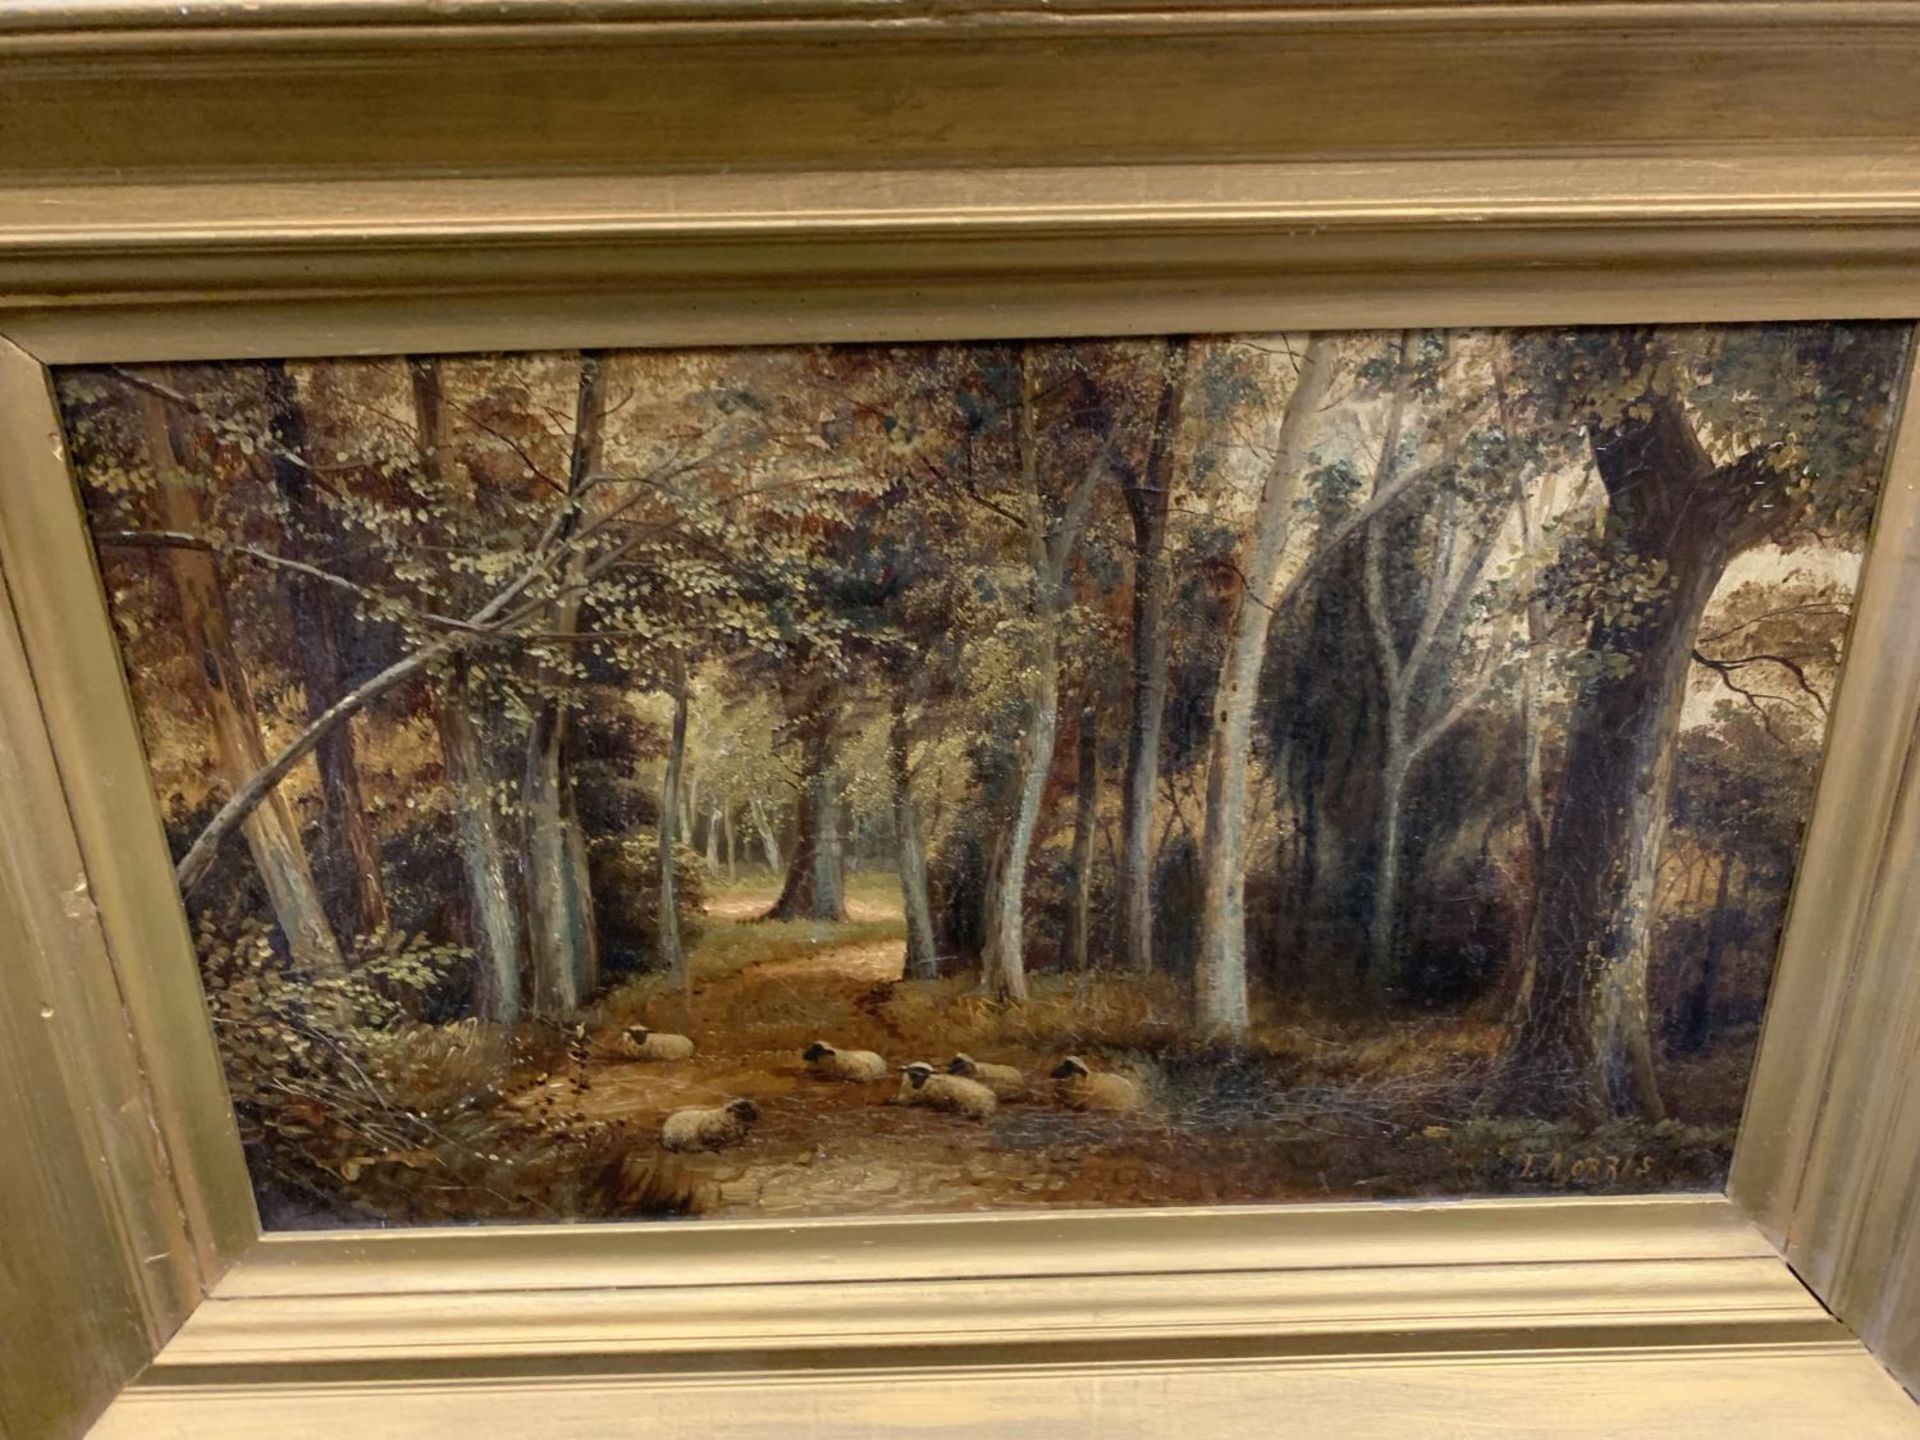 A GILT FRAMED OIL PAINTING OF SHEEP IN A FOREST LANDSCAPE, SIGNED J.MORRIS, 47 X 68CM - Image 4 of 8